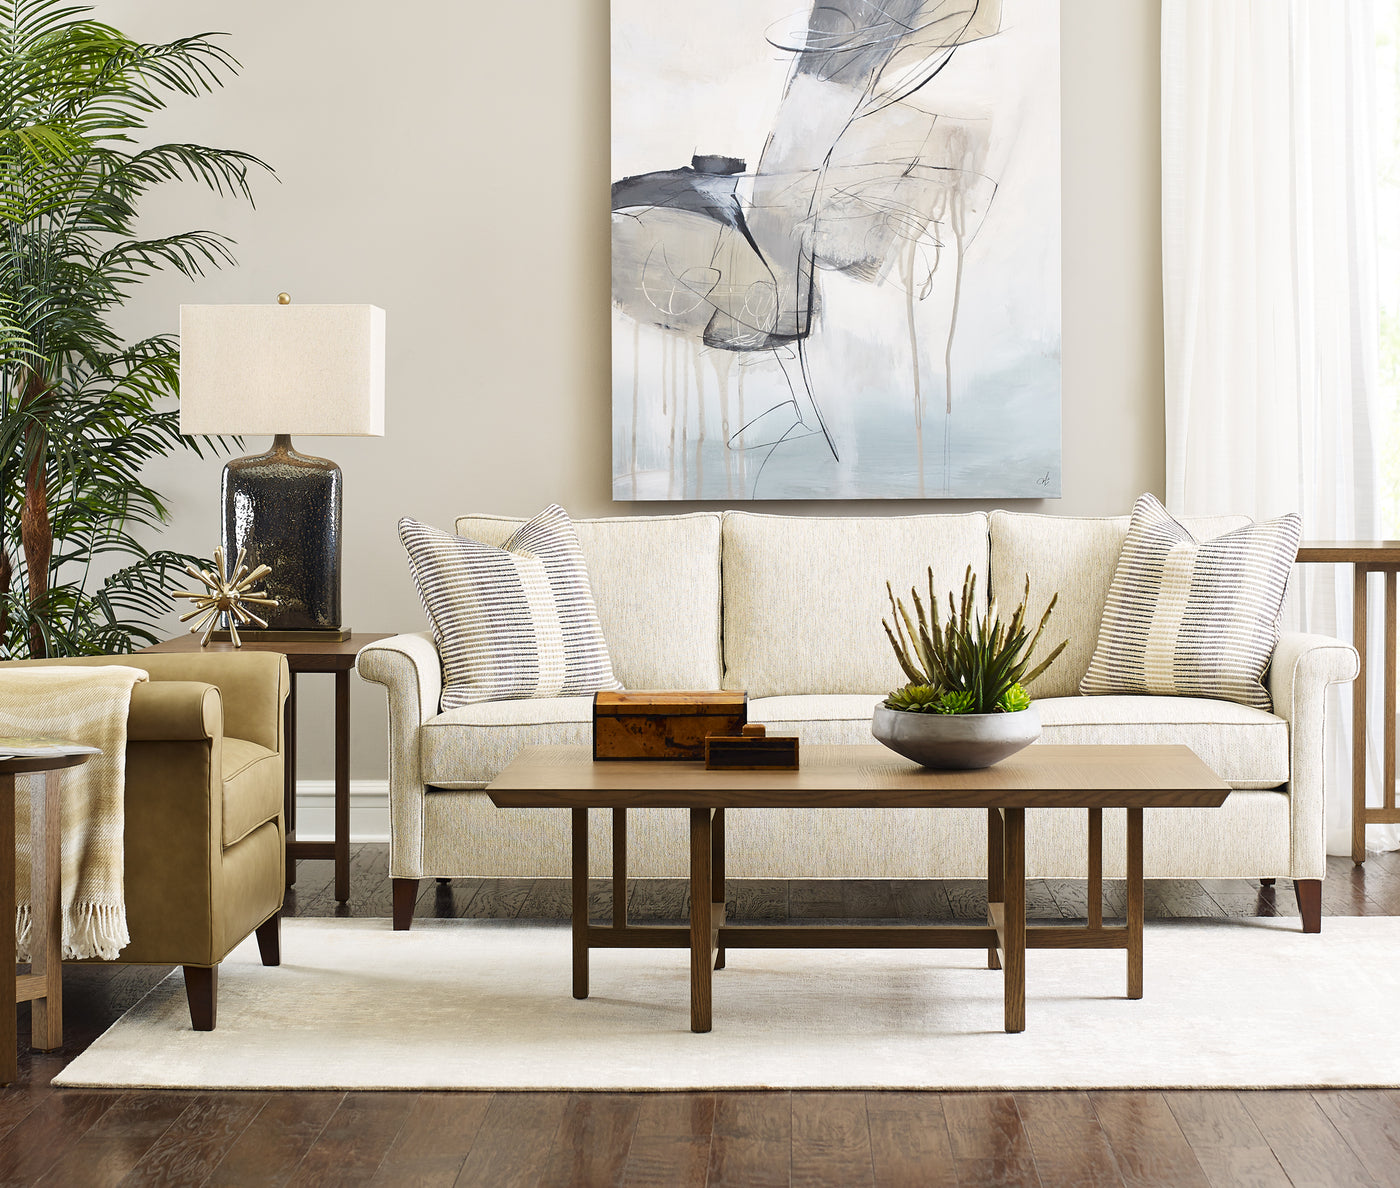 Origins by Stickley Belleville living room upholstery set up, showcasing a white fabric sofa and tan leather chair with a coffee table in front of them. There is a large white, gray, and blue painting behind the sofa and a green plant next to the sofa.